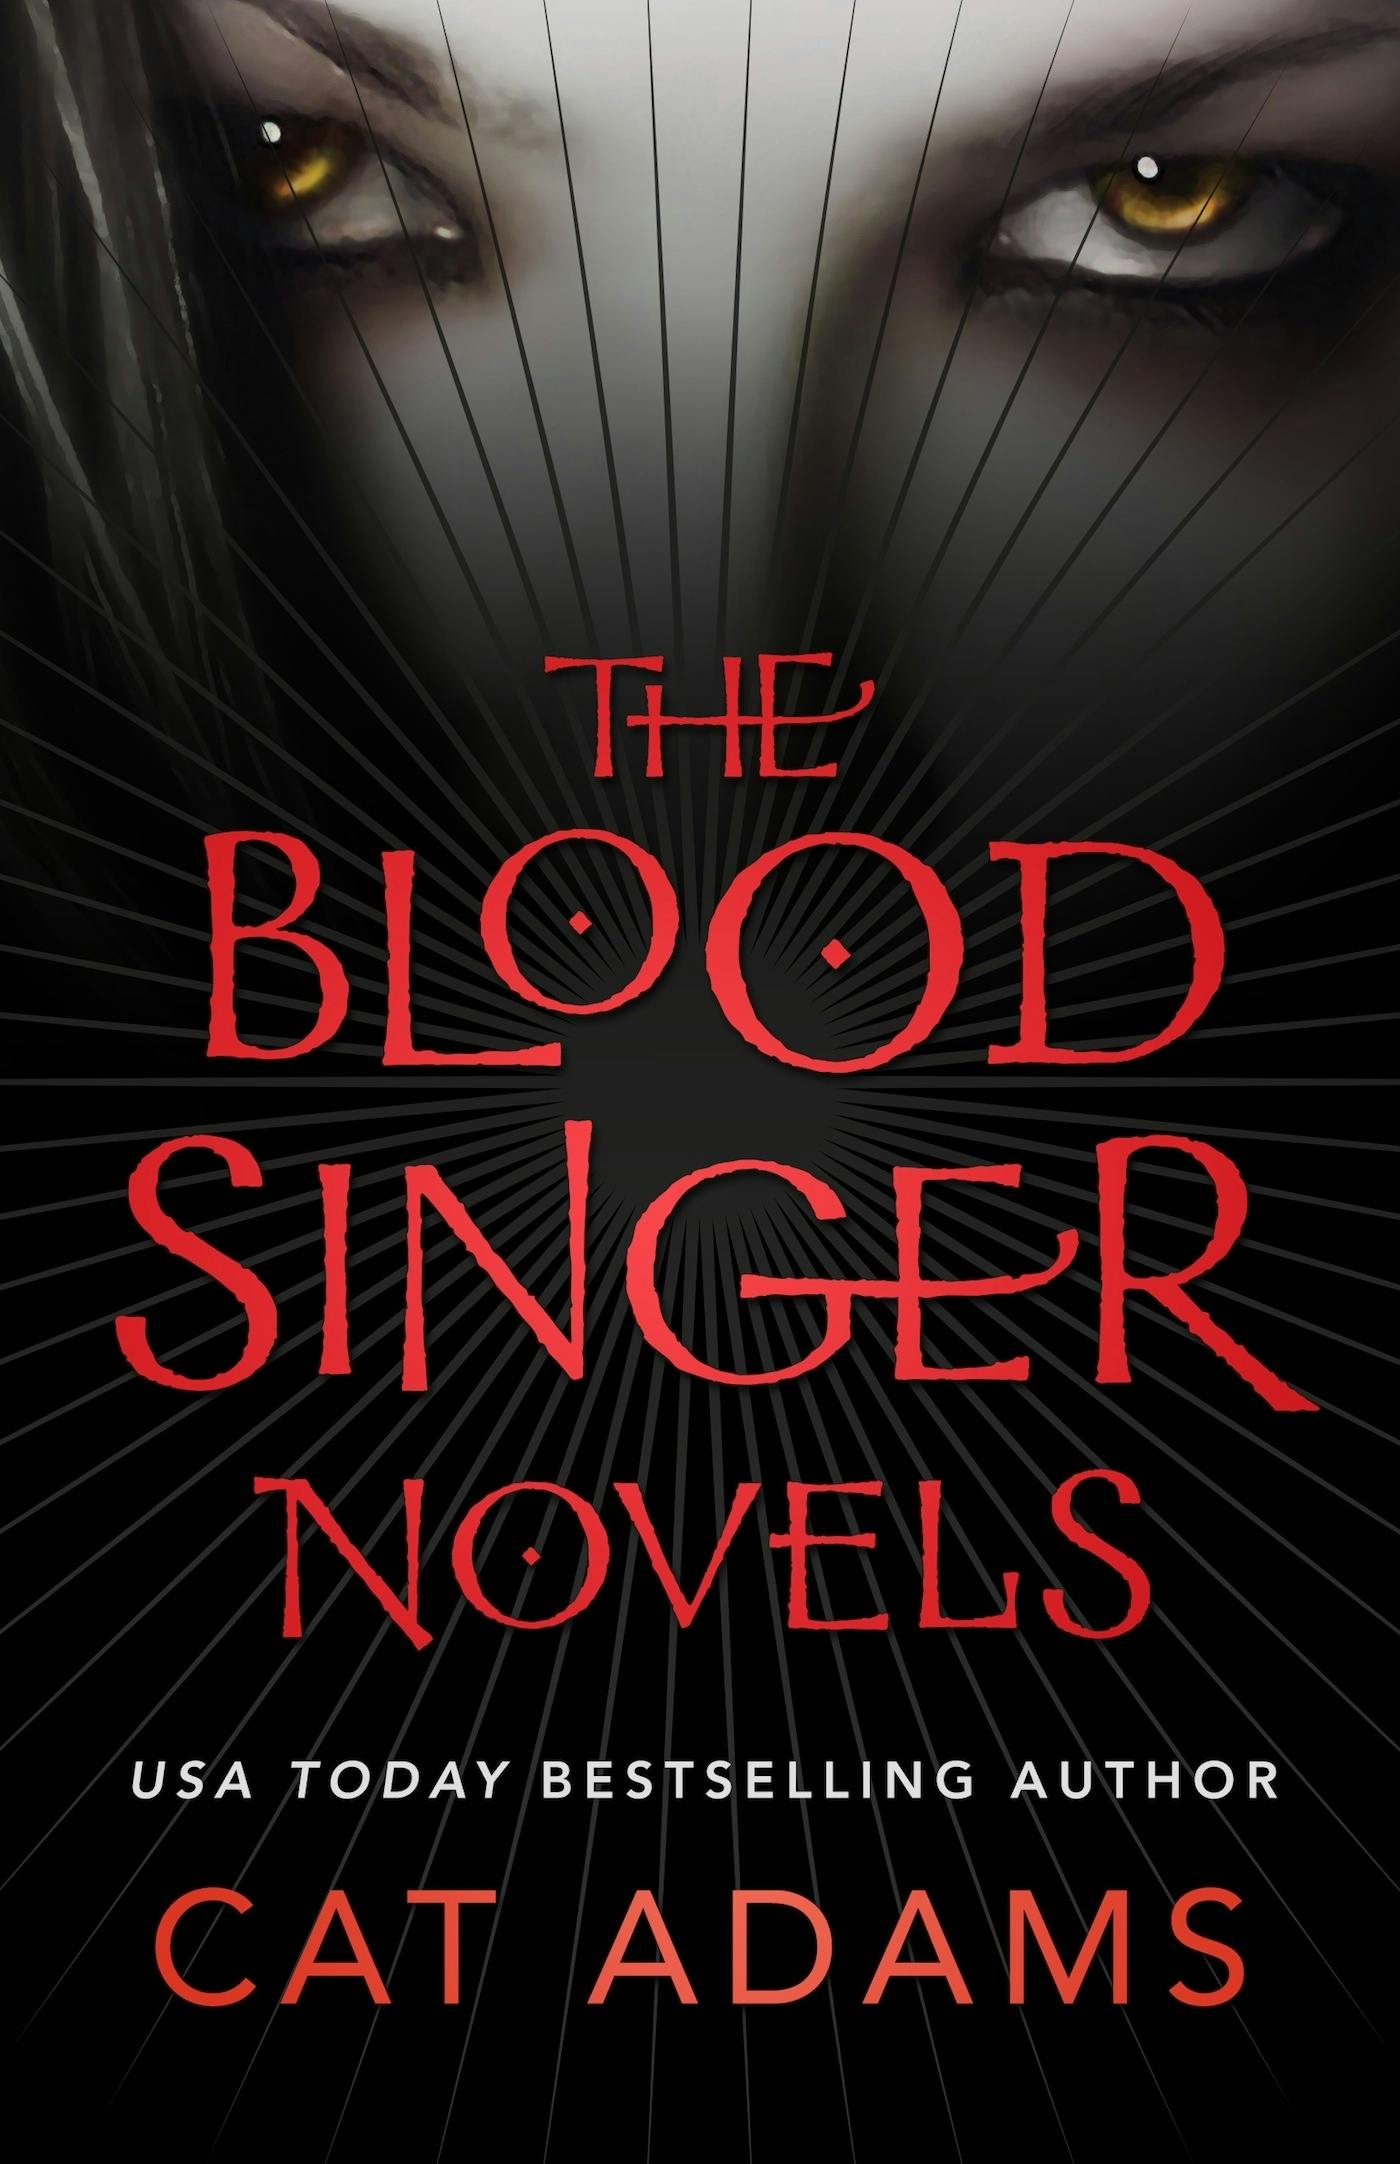 Cover for the book titled as: The Blood Singer Novels